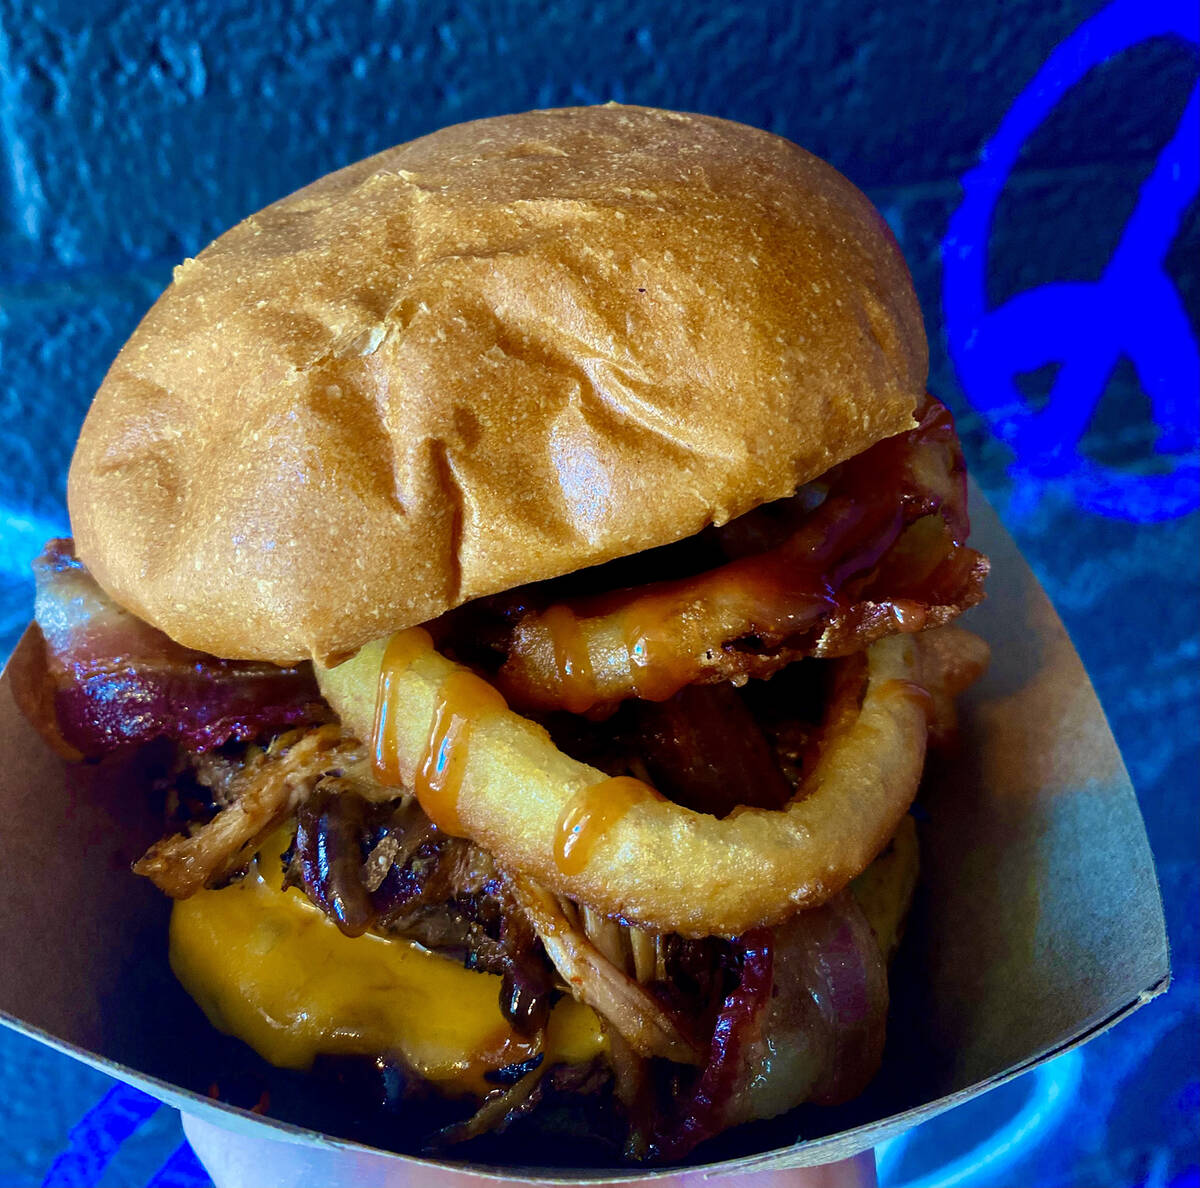 A Piggie Smalls burger with pulled pork, fried jalapeños and house barbecue sauce from Str ...